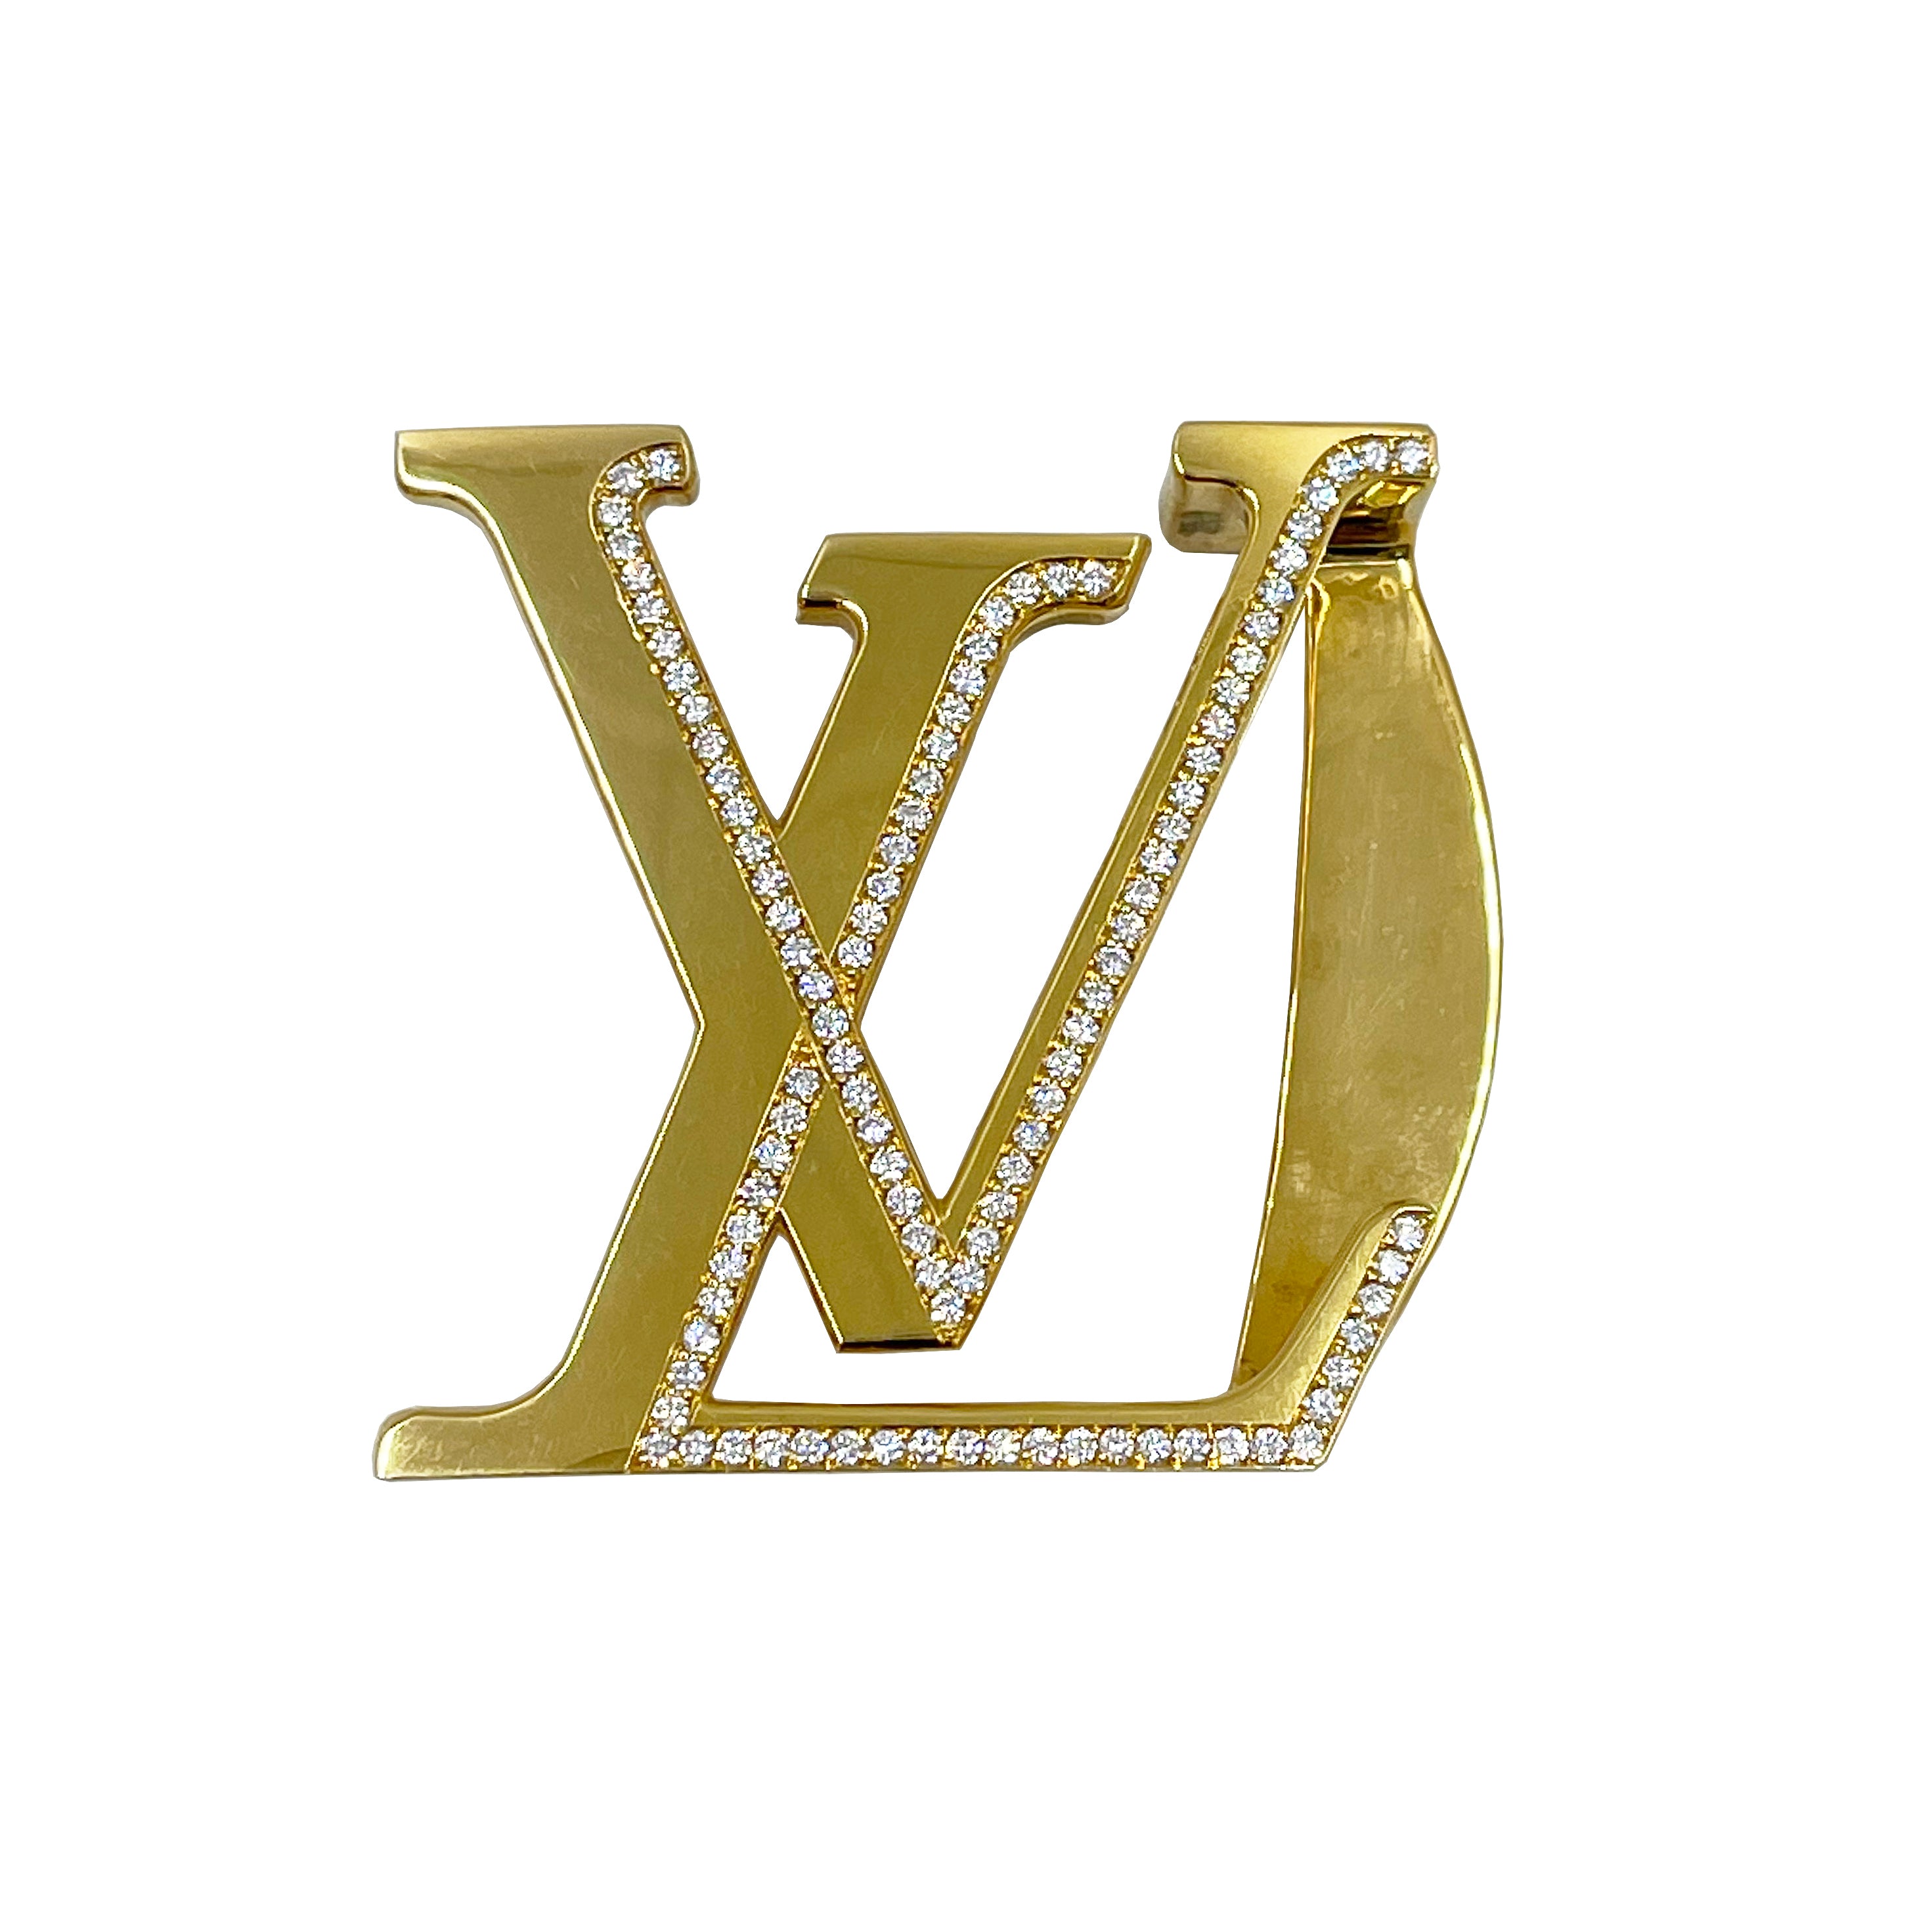 Image result for louis vuitton logo gold